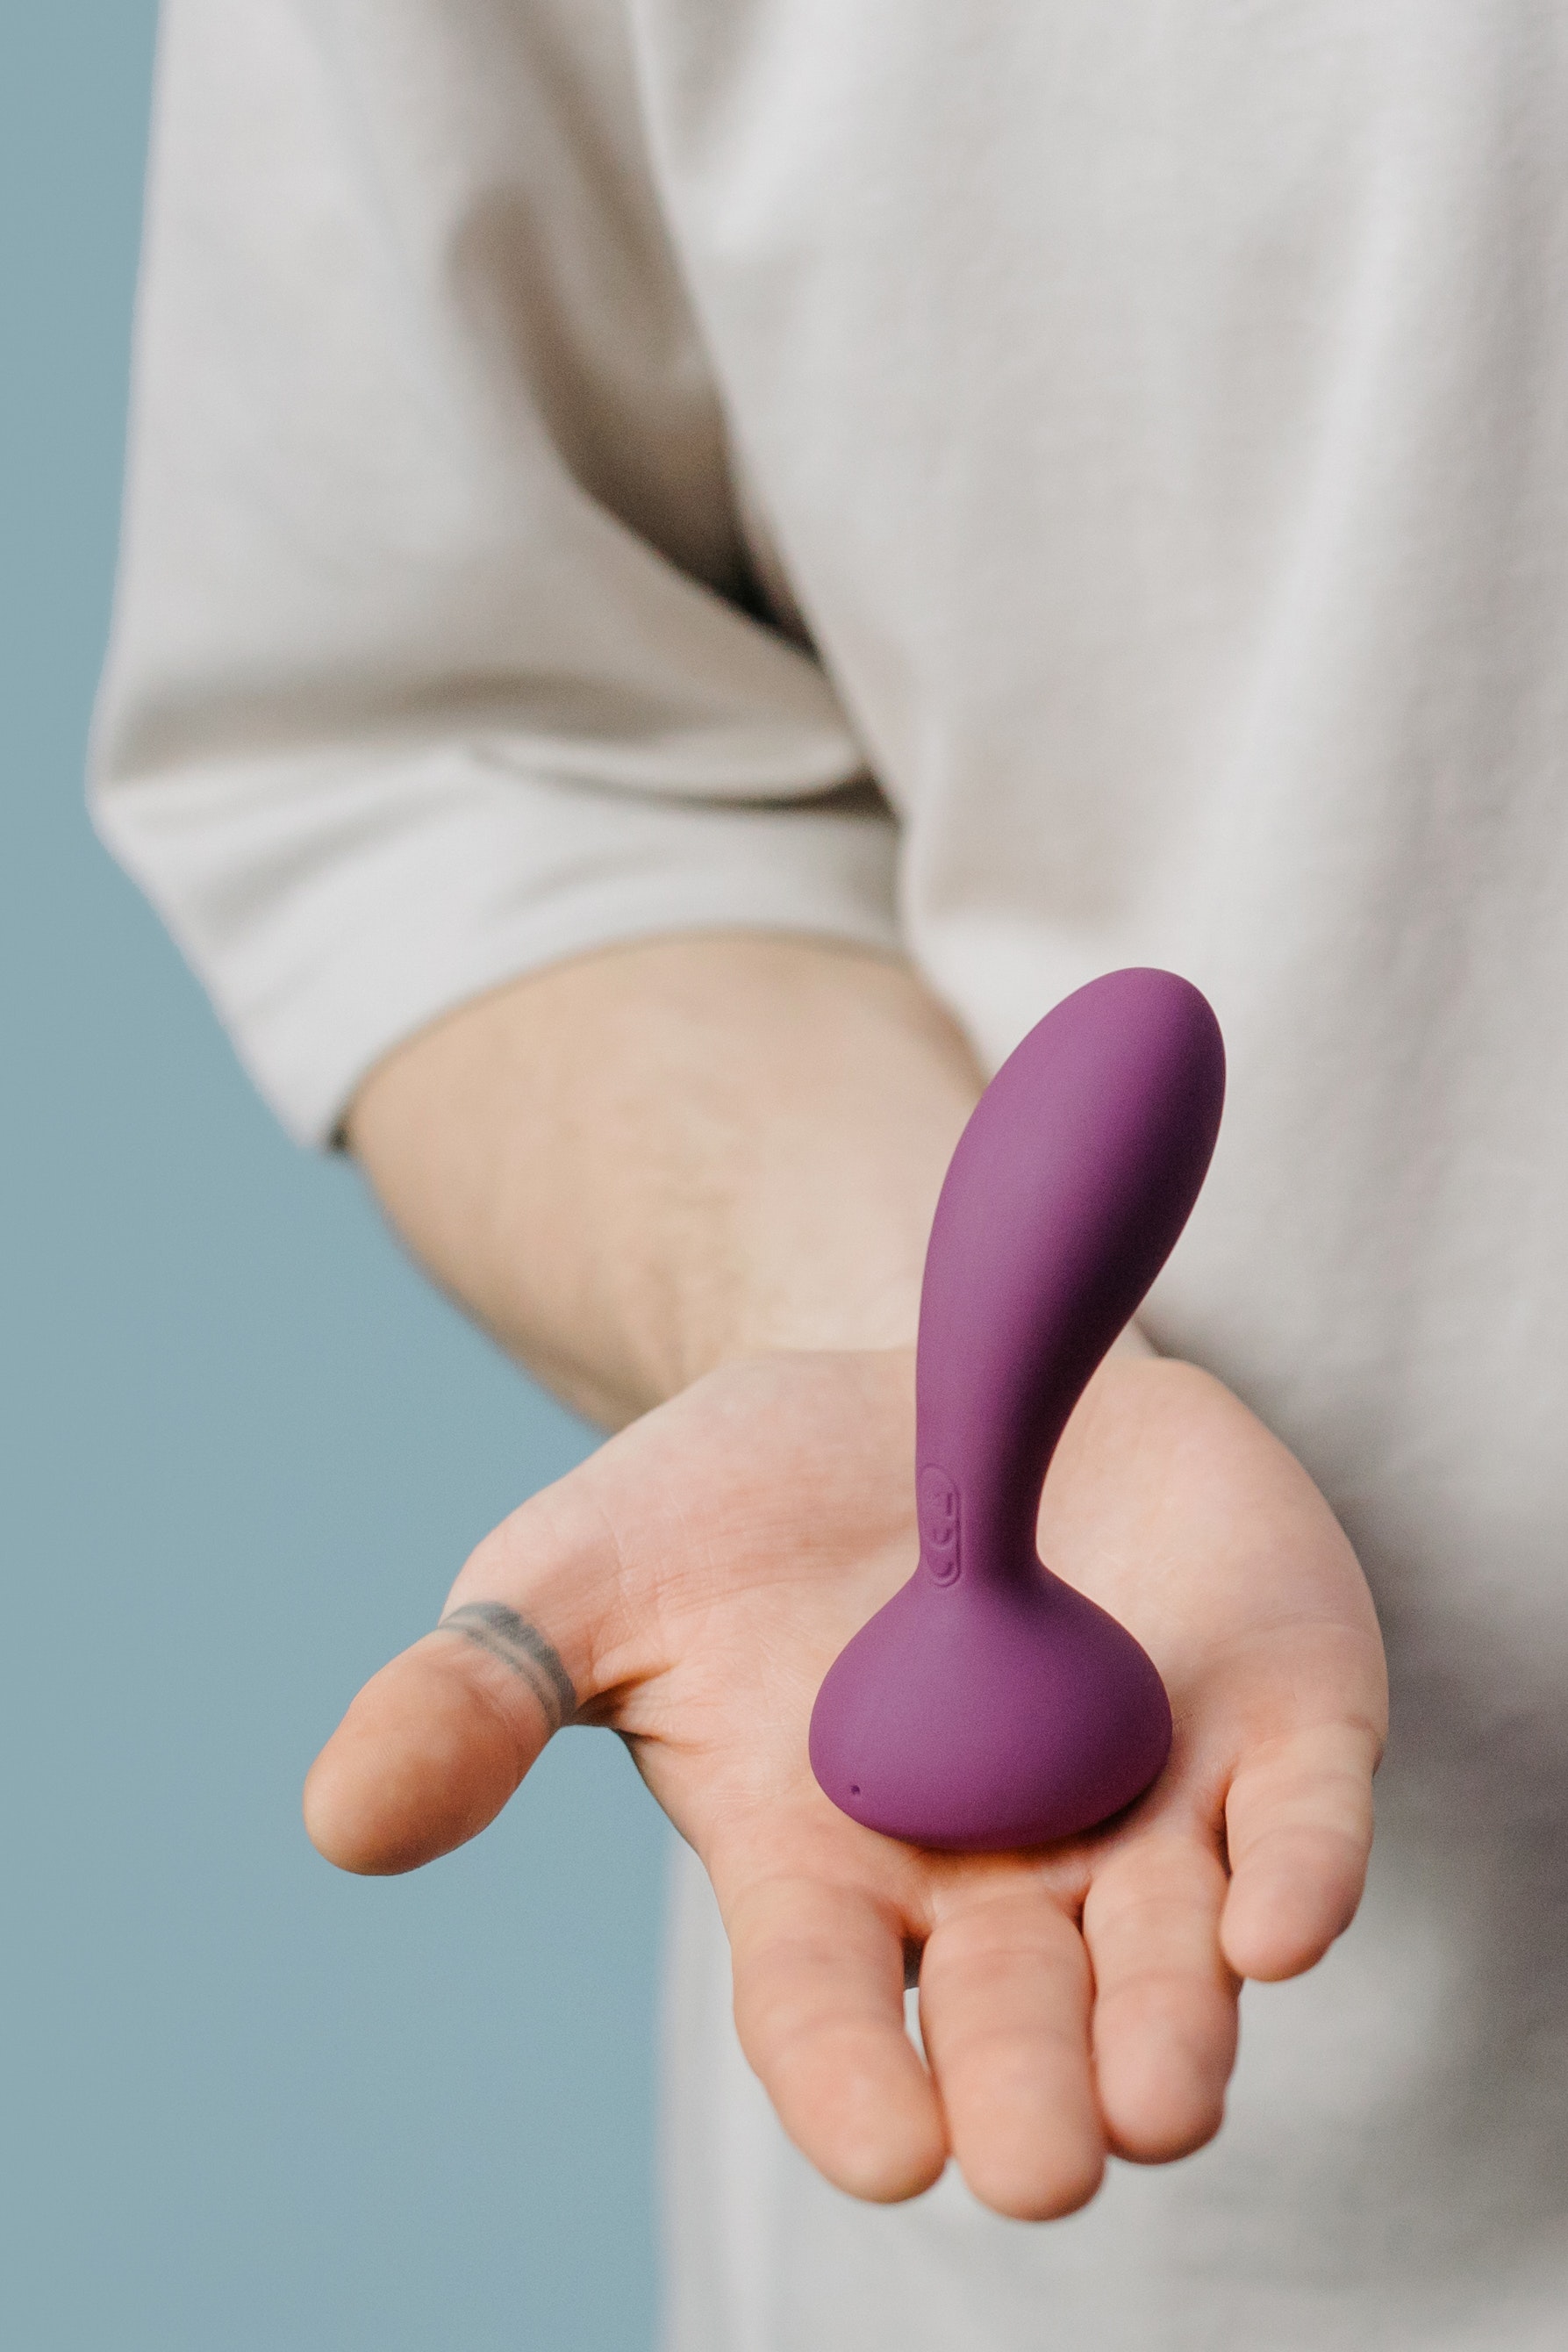 Having awesome time with my sex toys